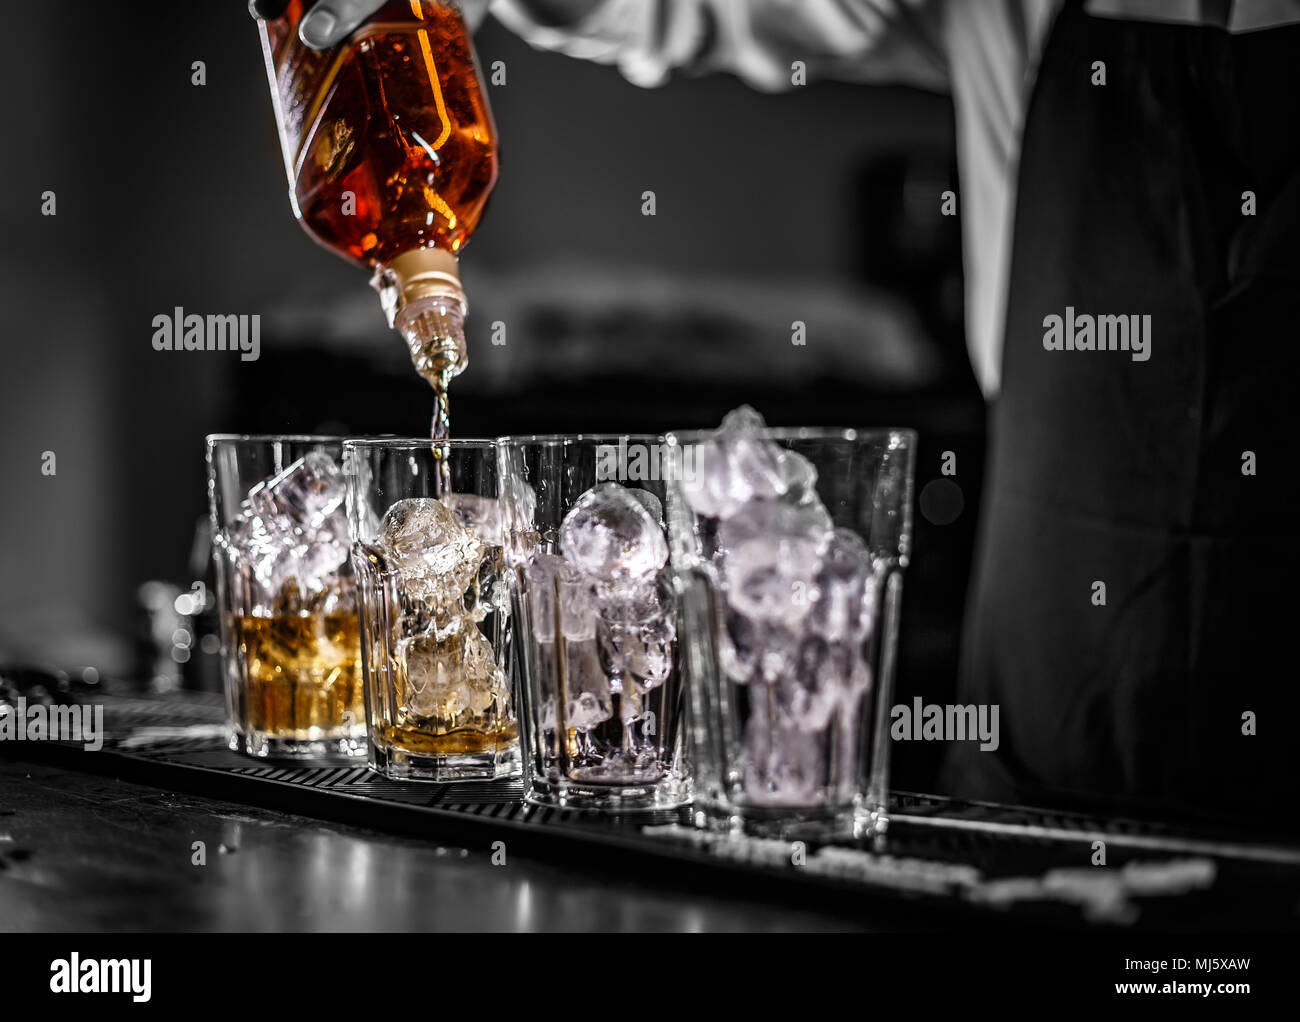 Barman pouring alcoholic drink into the glasses with ice cubes on the bar counter Stock Photo